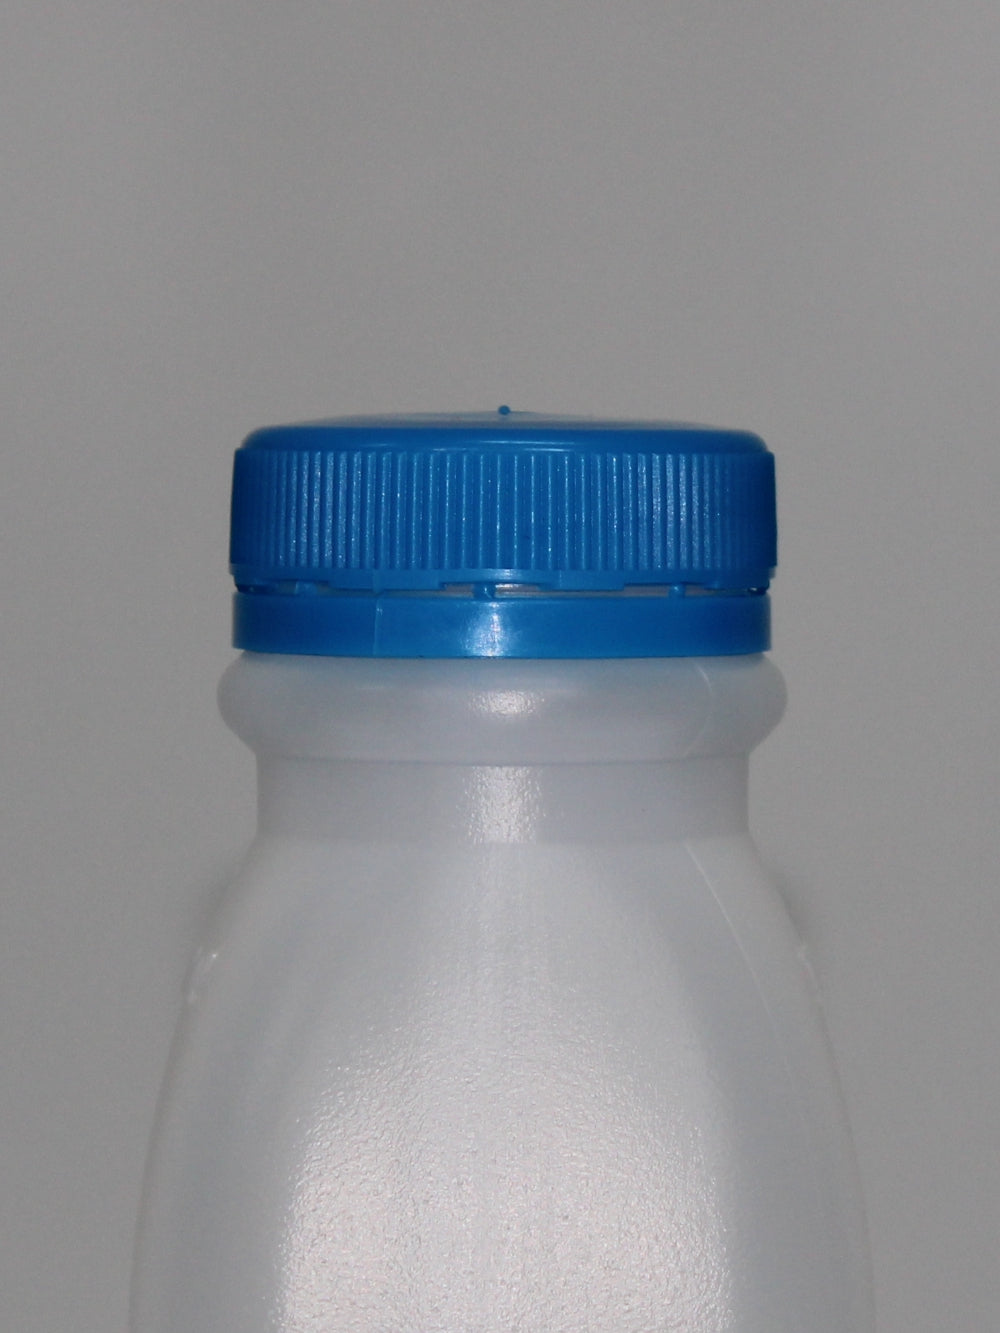 1Lt Dairy/Milk Square HDPE Bottle with Handle - (Box of 100 units) - Packnet SA